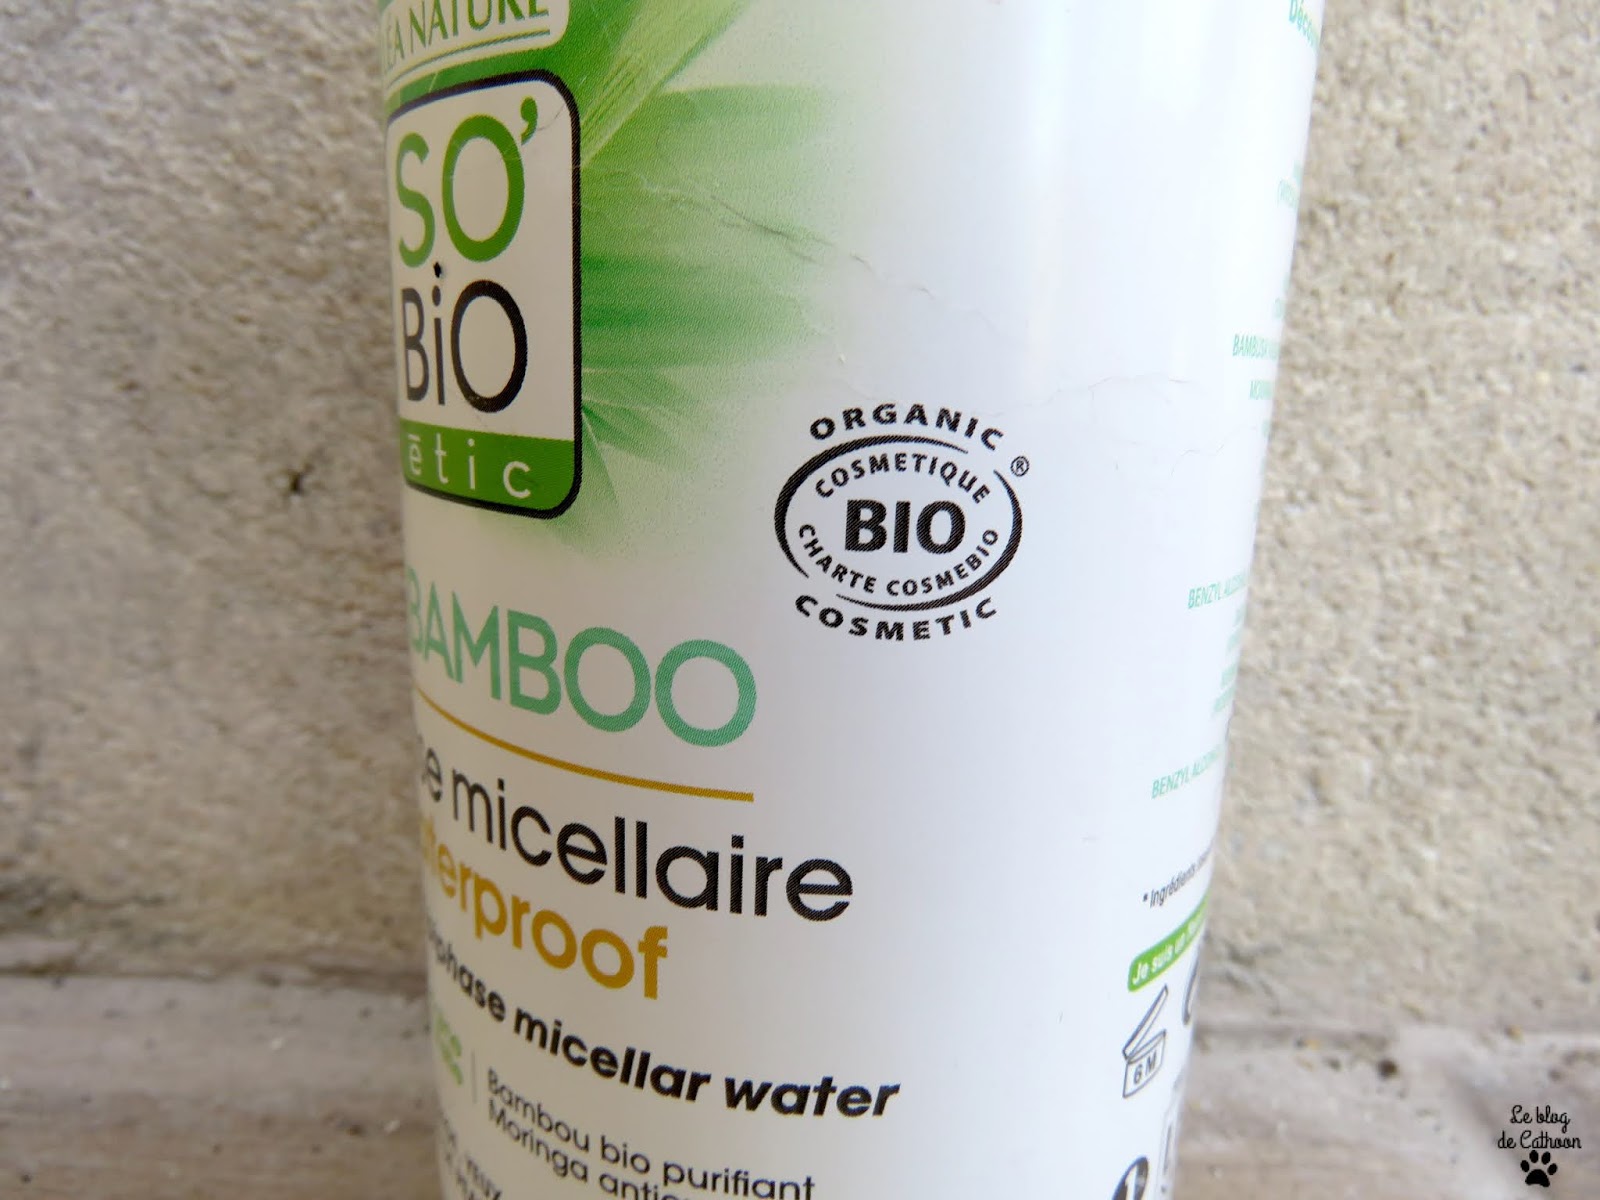 Pur Bamboo - Biphase Micellaire Waterproof - So'Bio Etic